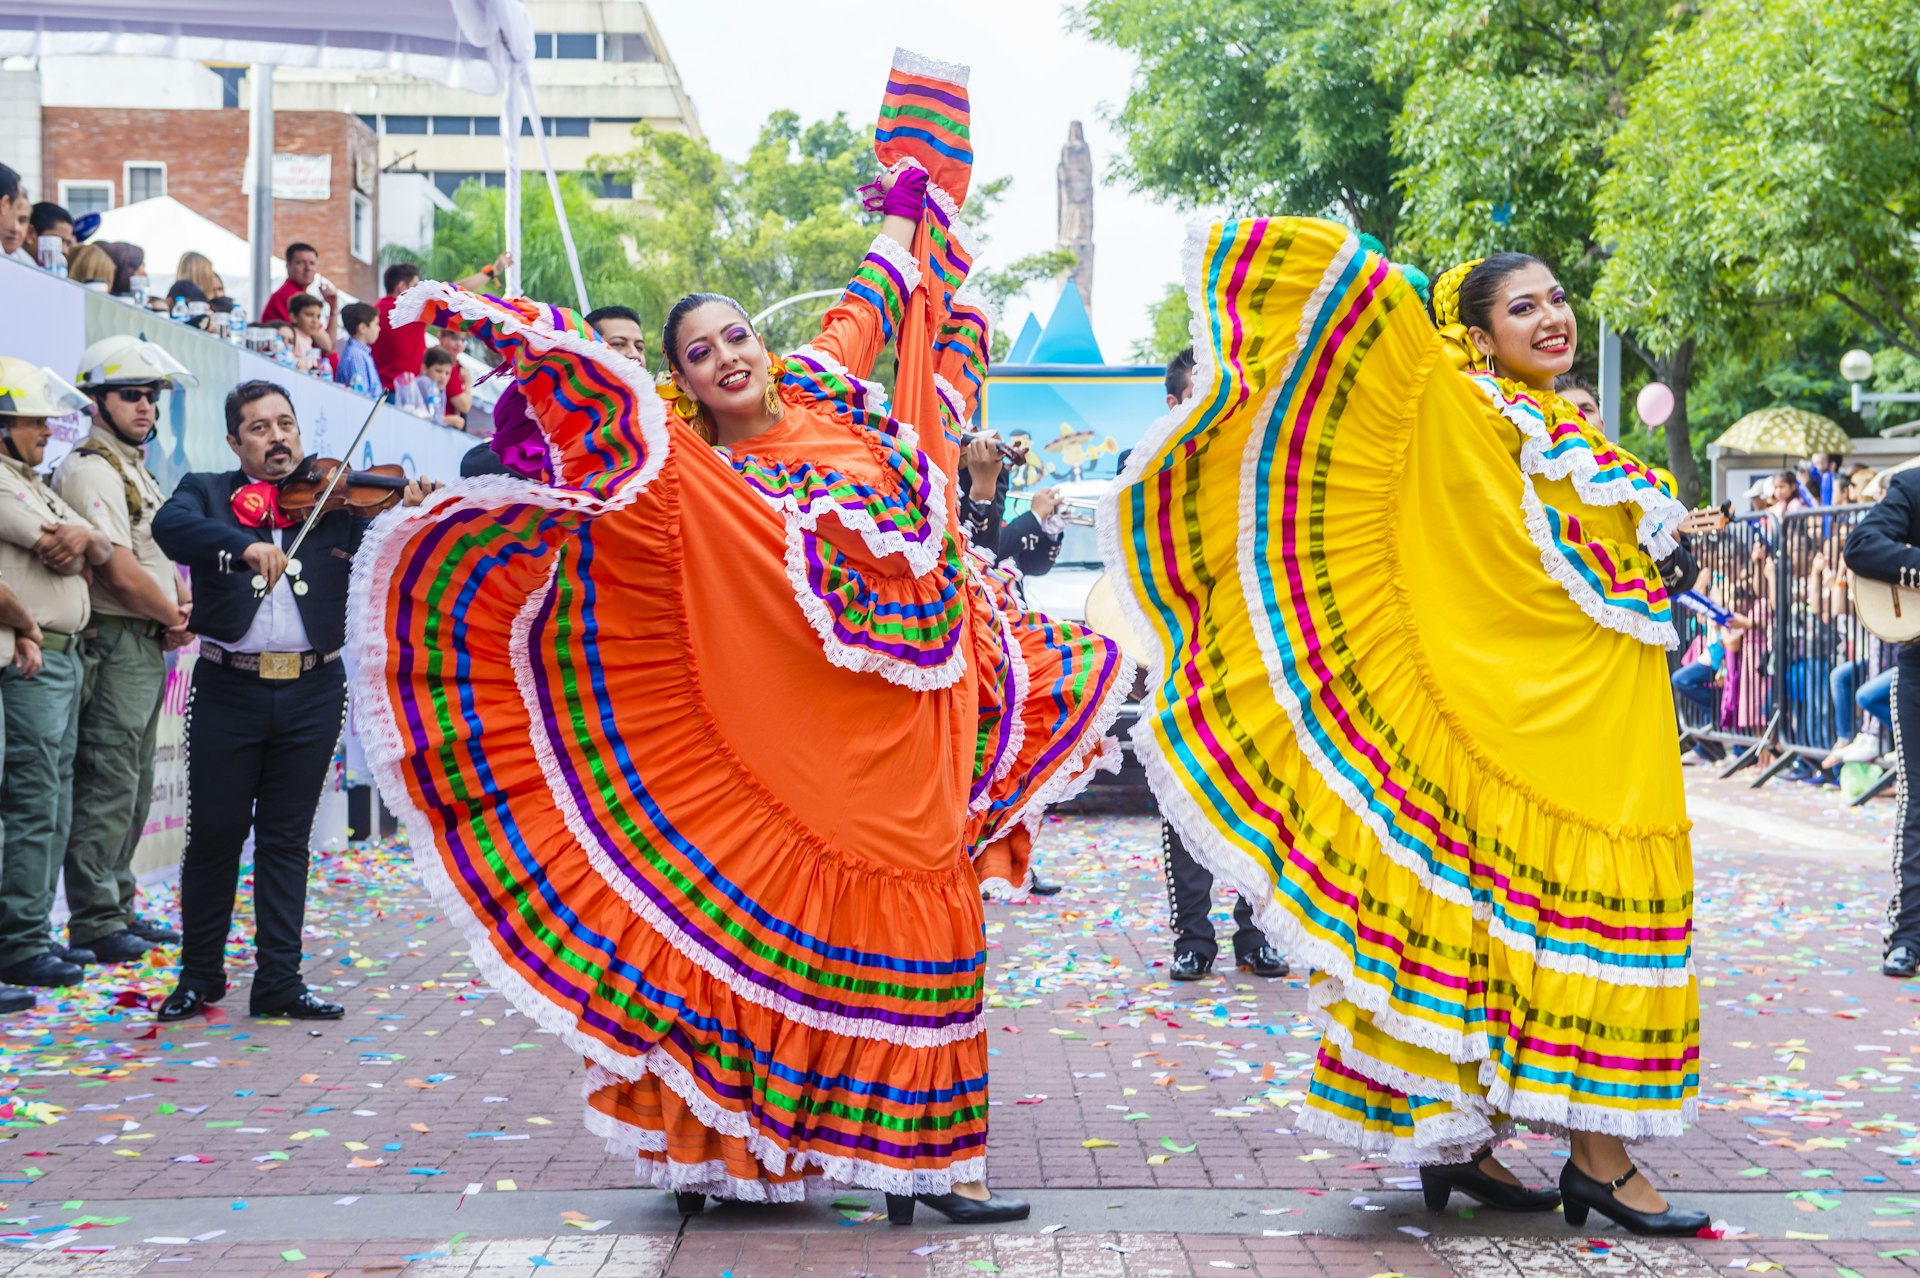 Two dancers wave the long skirts of their tradition dresses as they take part in a parade